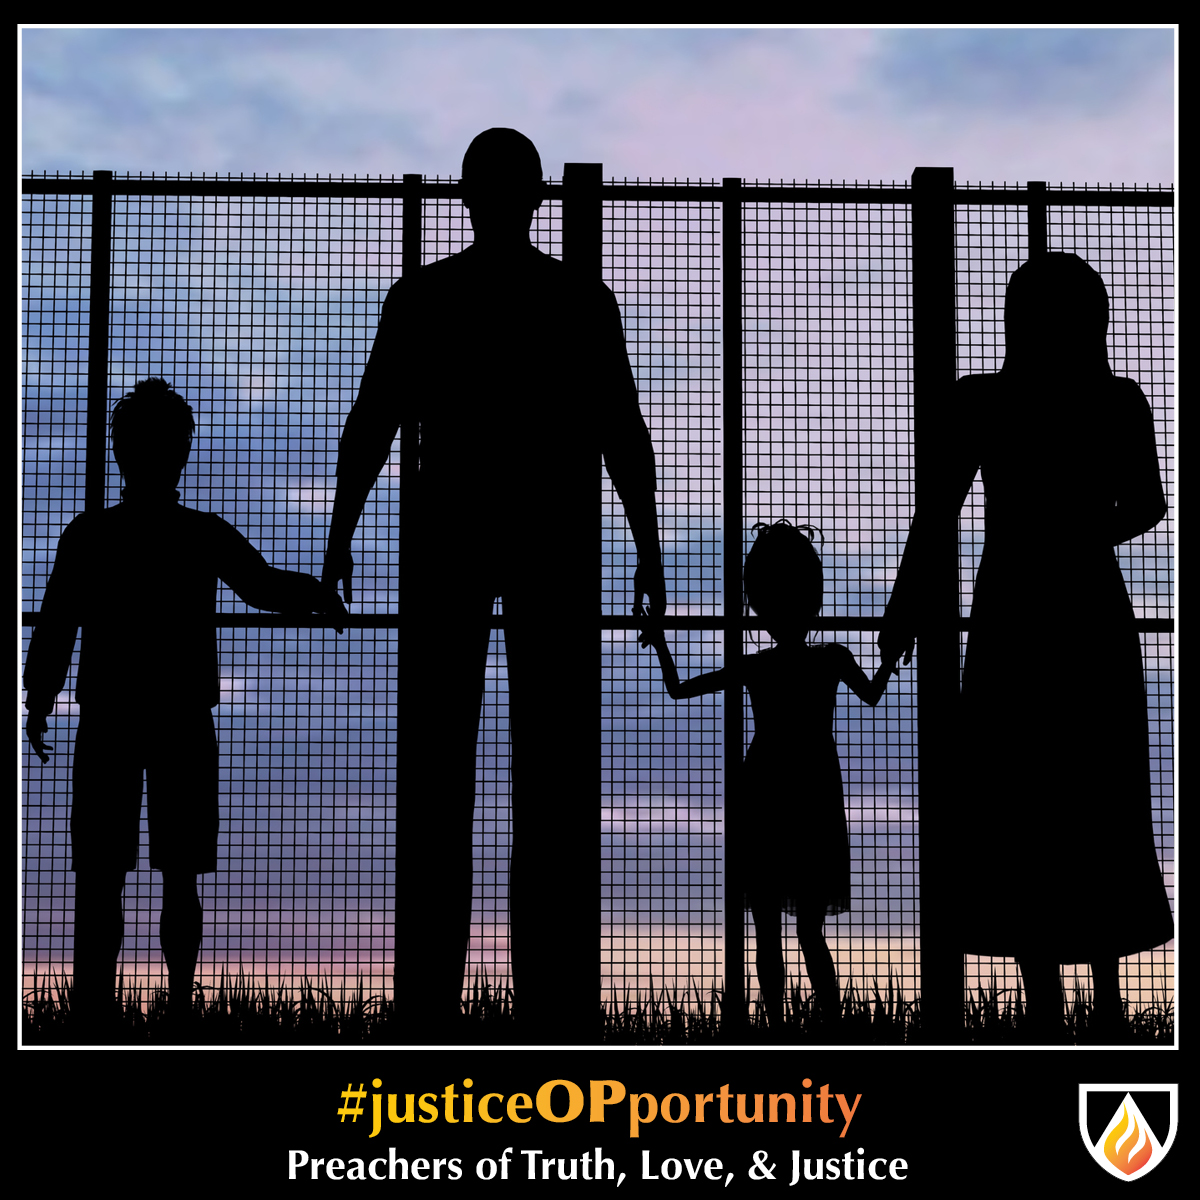 #justiceOPportunity Thursday: March 12, 2020